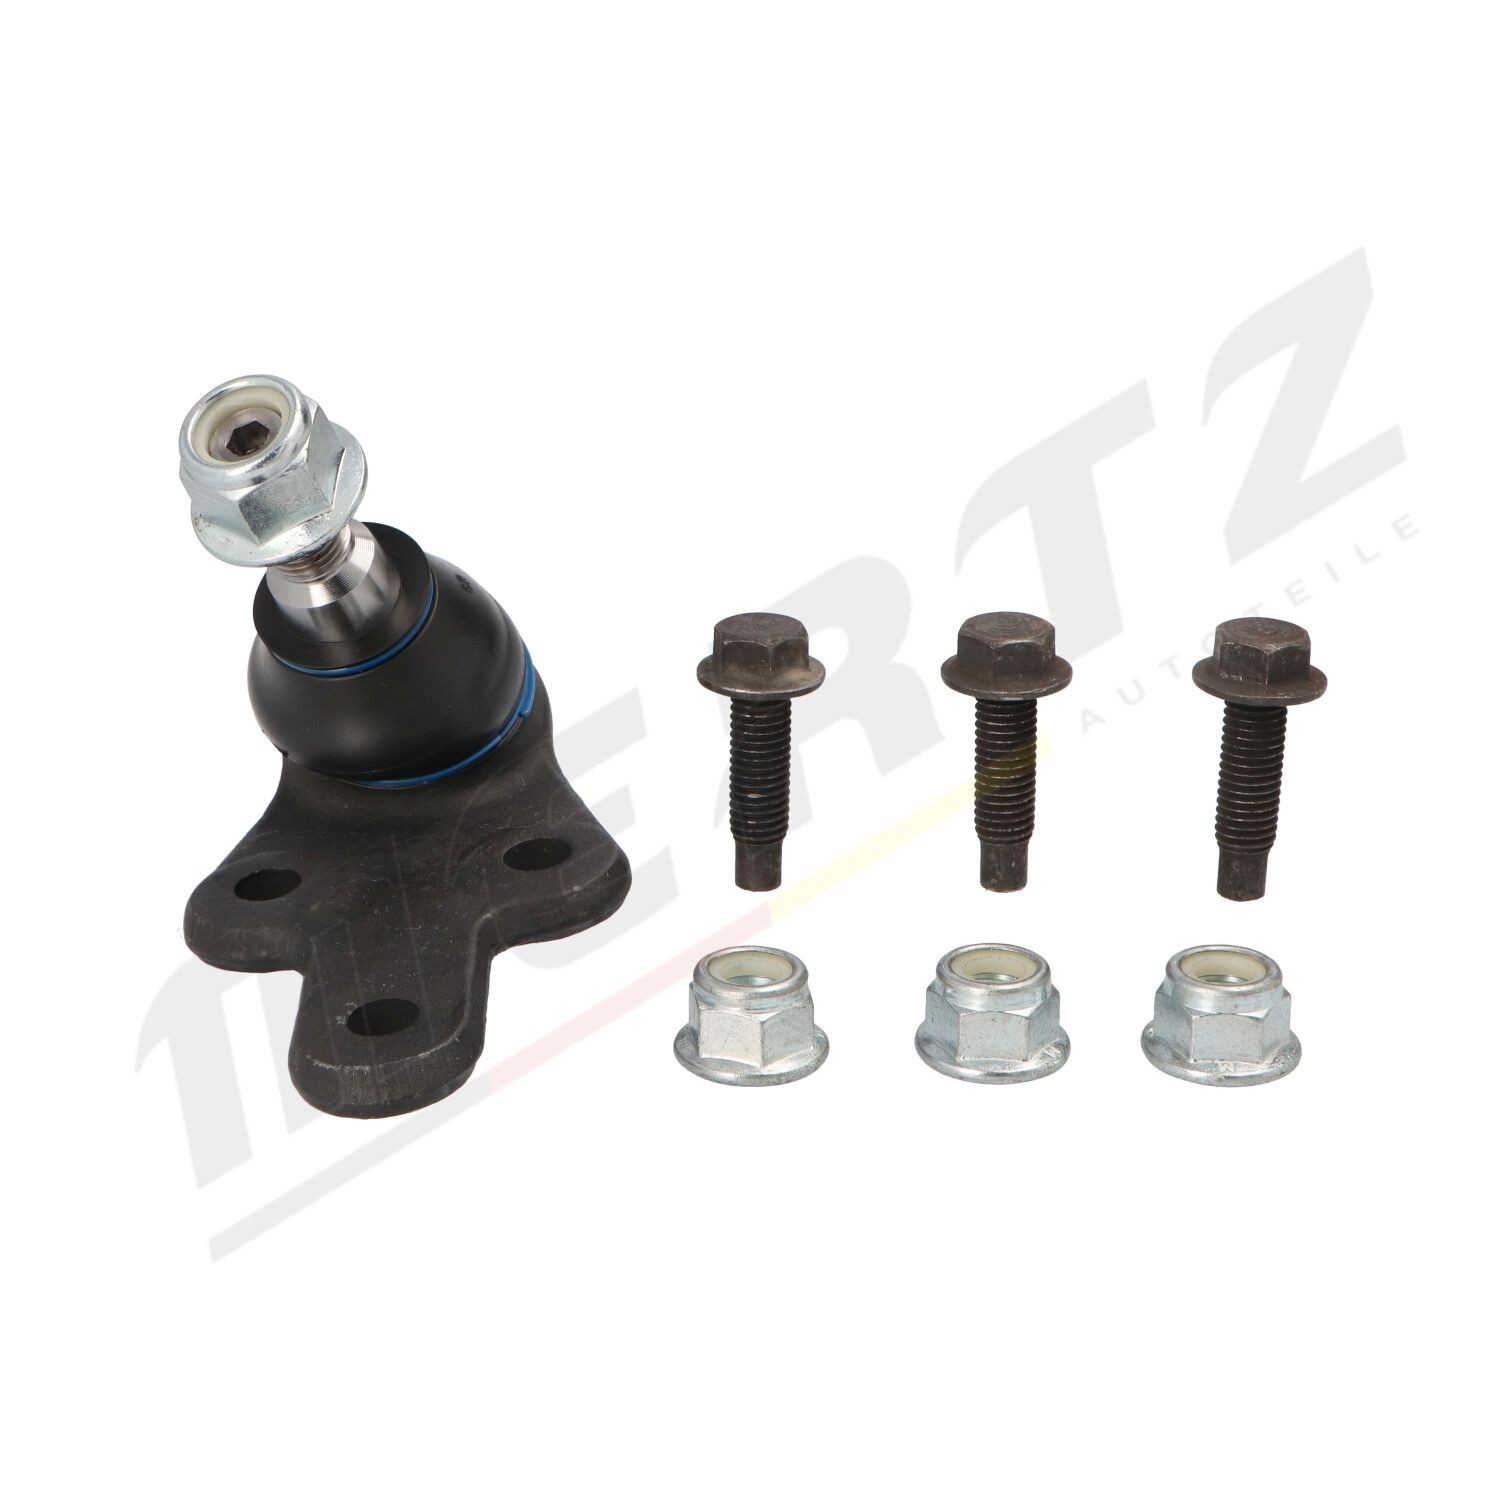 Suspension ball joint MERTZ Front Axle Left, Front Axle Right, with attachment material, 21mm, M14x1,5mm - M-S0640